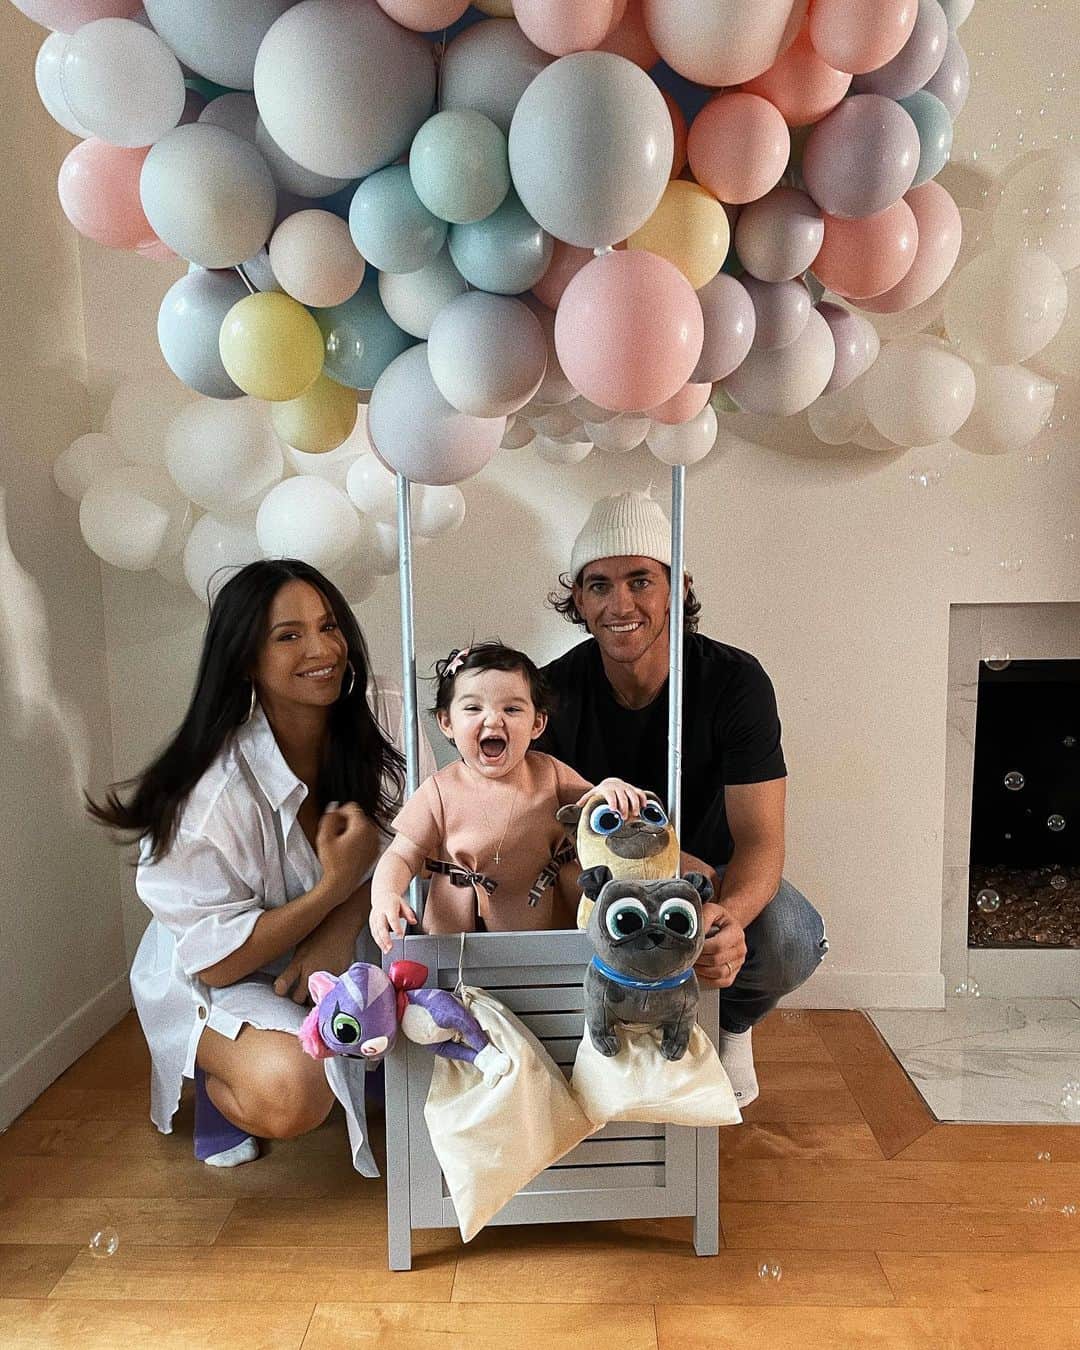 cassieのインスタグラム：「Frankie’s Puppy Dog Pals 1st Birthday Pawty was a success! Thank you to Frankie’s team: @madco_team, @melissaandre & her stylist @heyimdeo. Thank you to Frankie’s Dada @alexfine44 and all of her family members for all of the fun toys and gifts! Thank you to Bubbe and Papa (@theewretch) for the flower crown & JoJo (@pamfine) for the outfit changes. 💗 We missed some of our family members being here, but we made the best of it with video chat! Frankie had a ball! 🐶 🥰♥️」